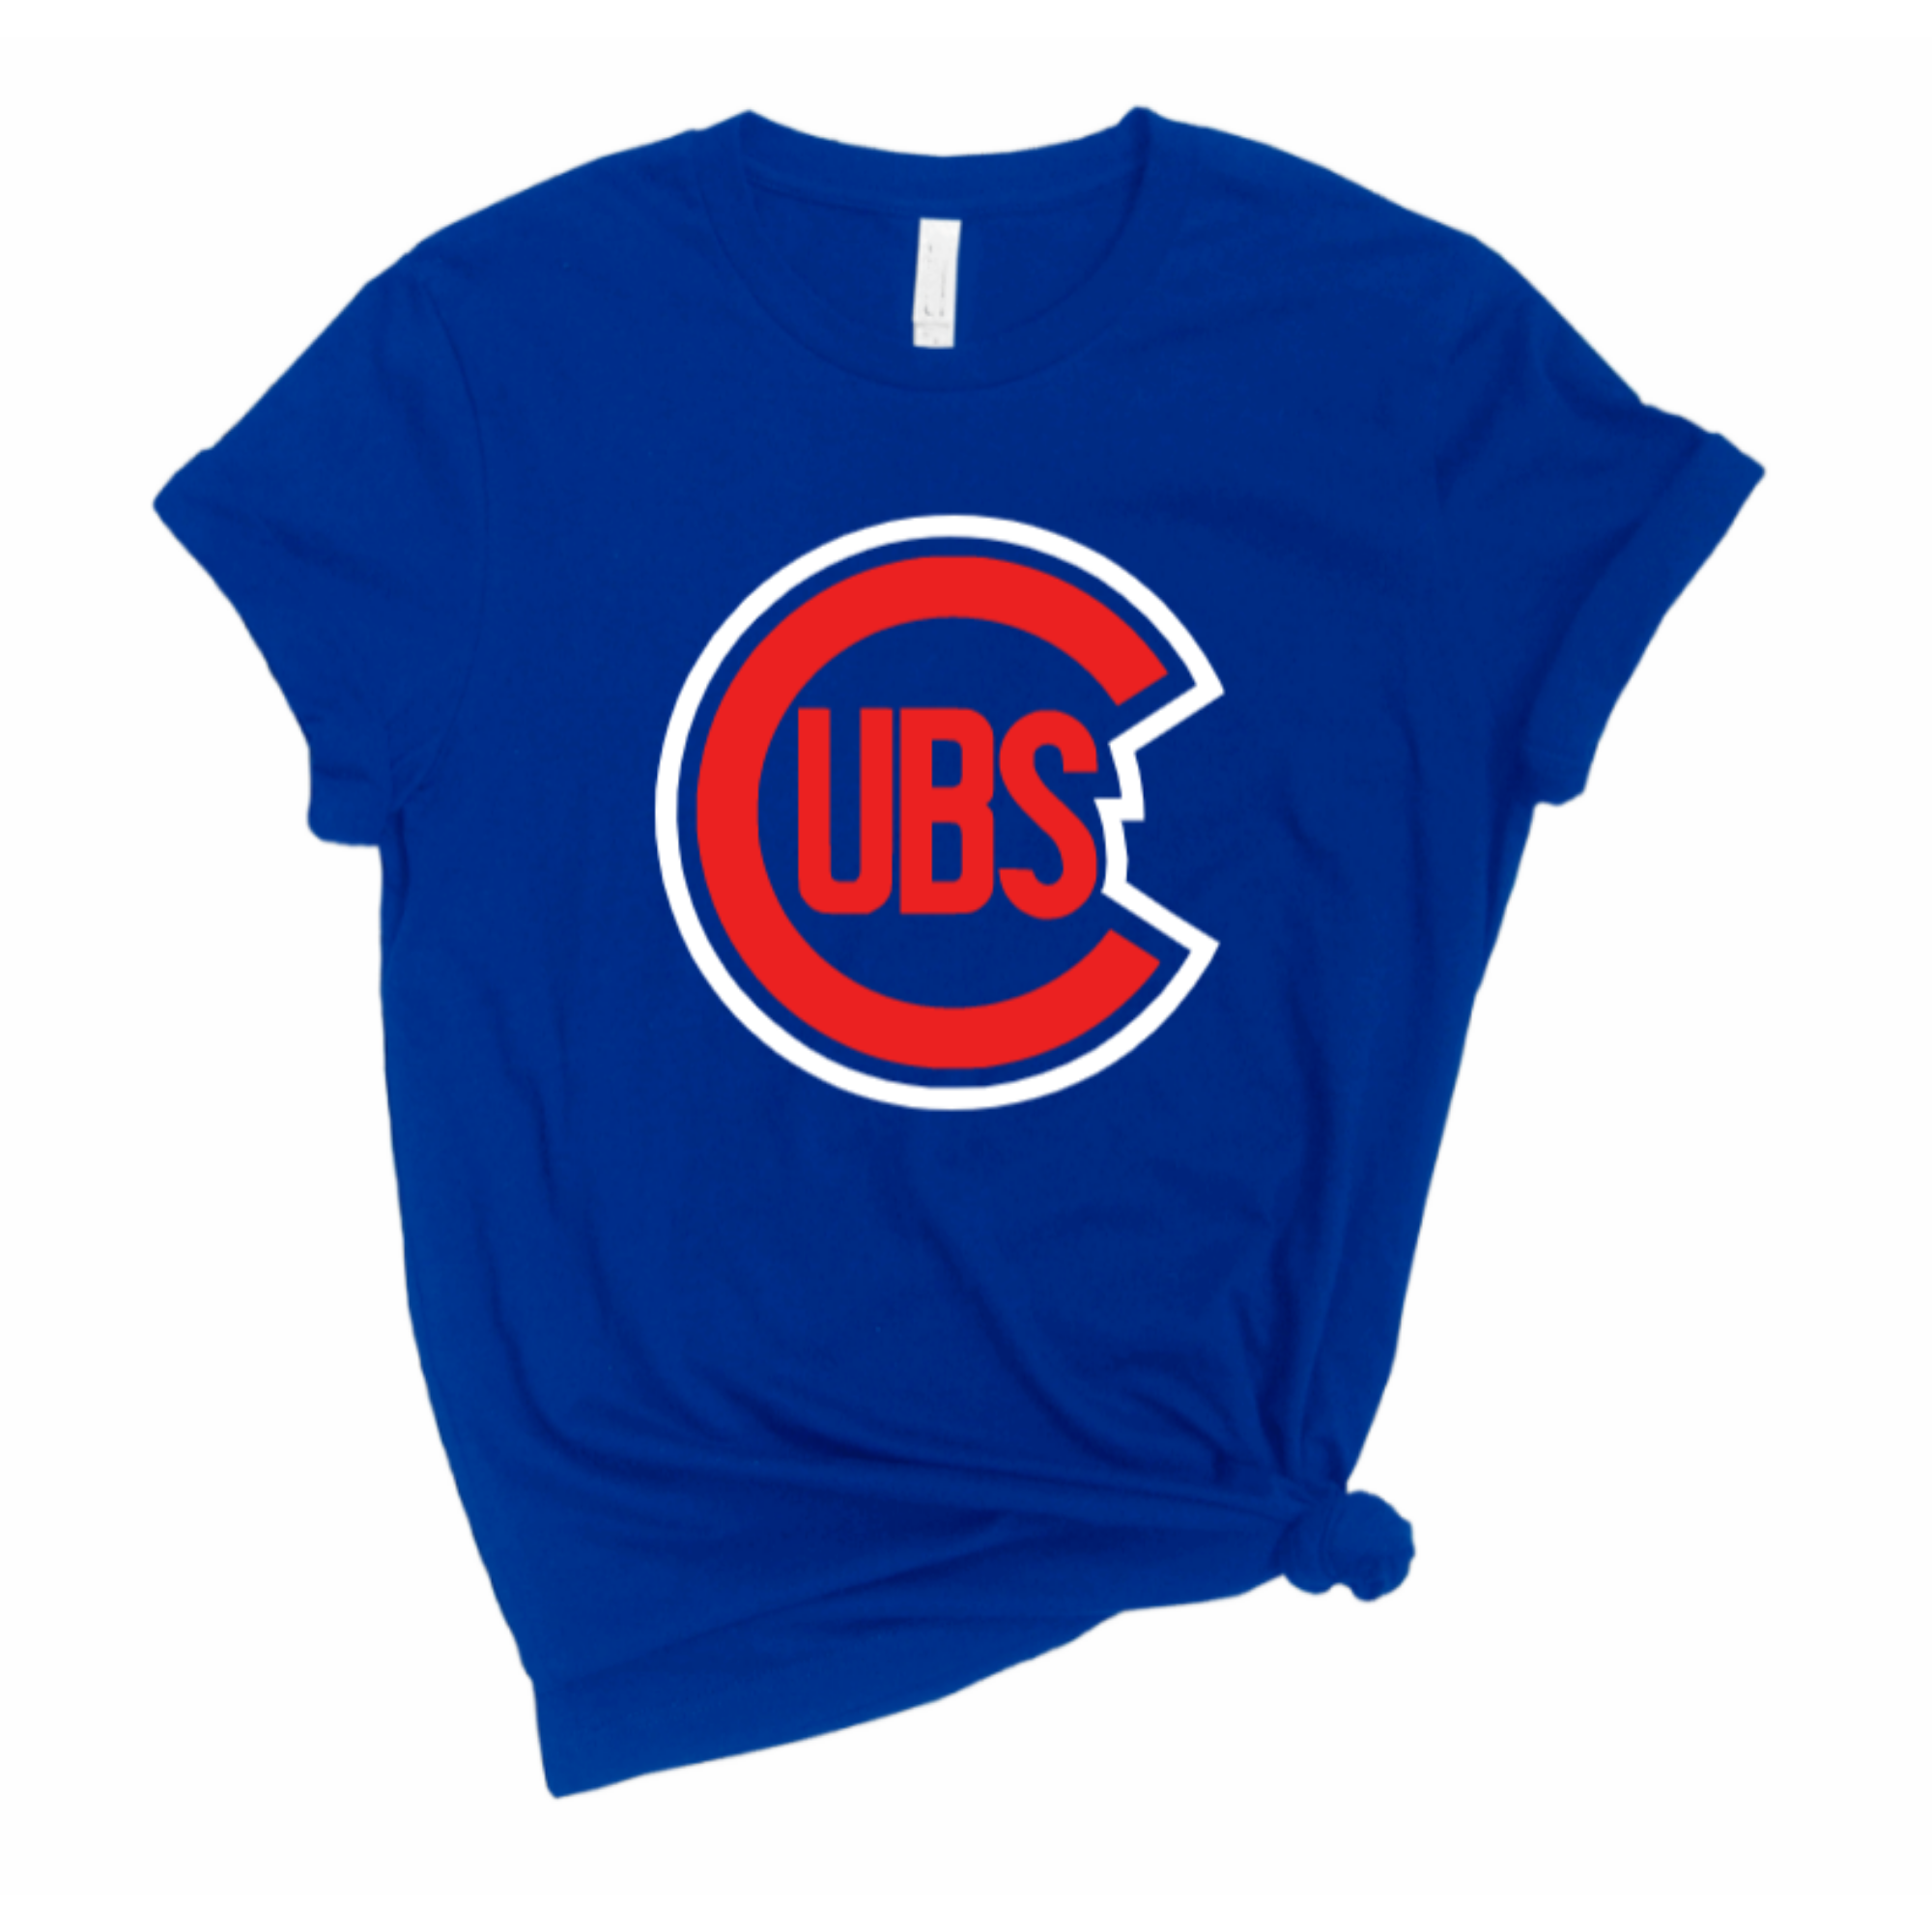 Women's Chicago Cubs Apparel, Cubs Ladies Jerseys, Clothing